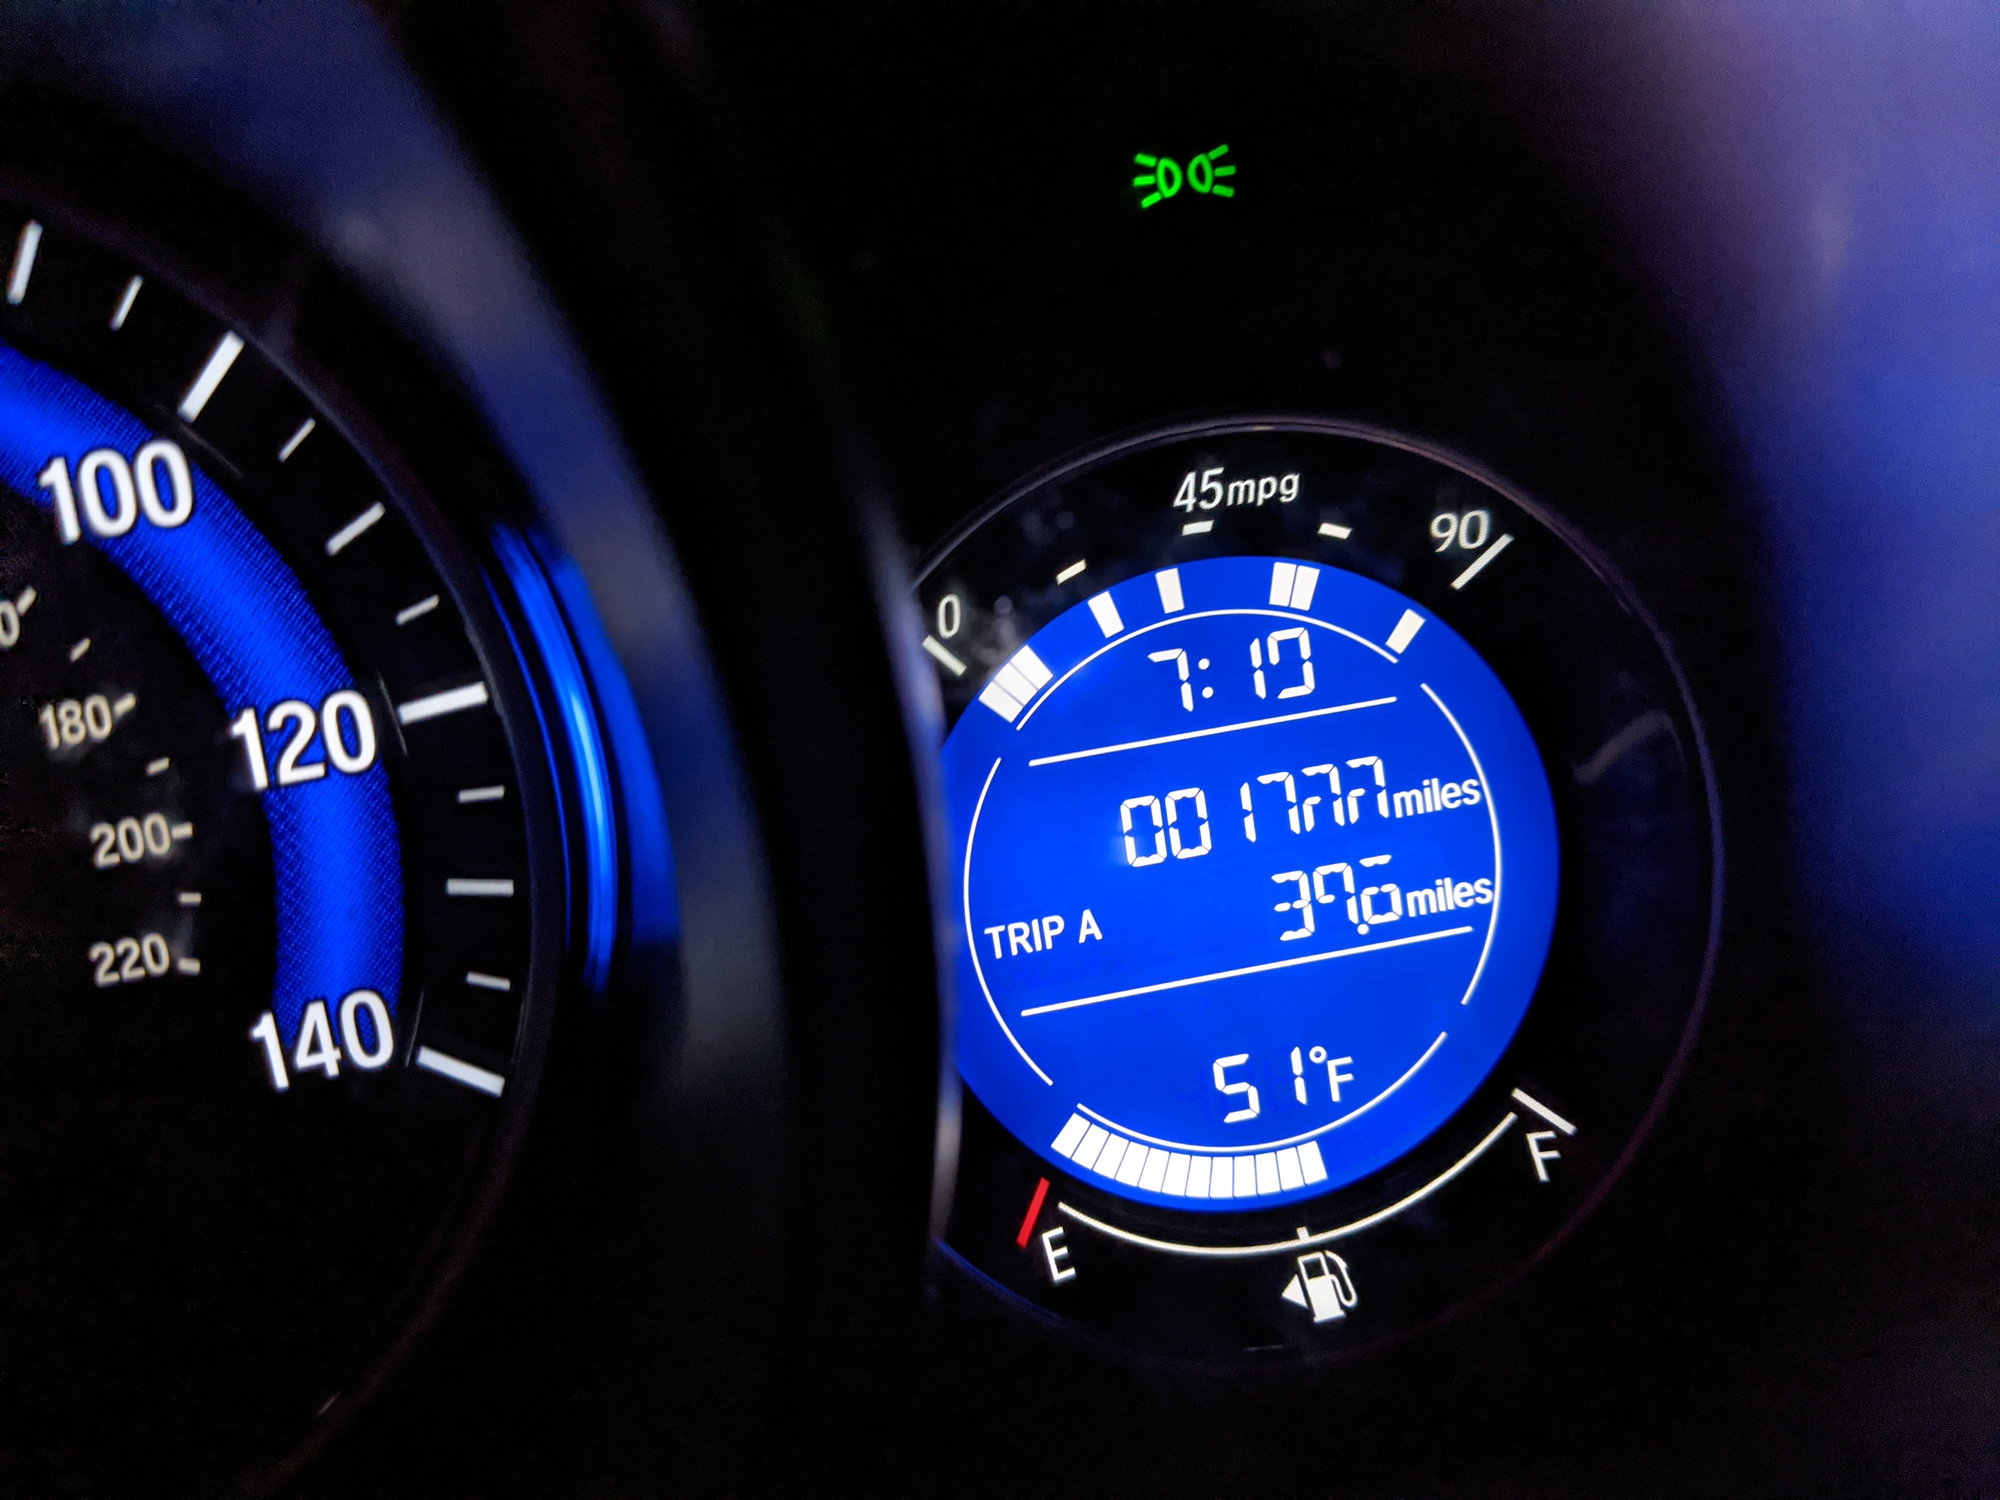 2015 Fit odometer display goes haywire - Unofficial Honda FIT Forums